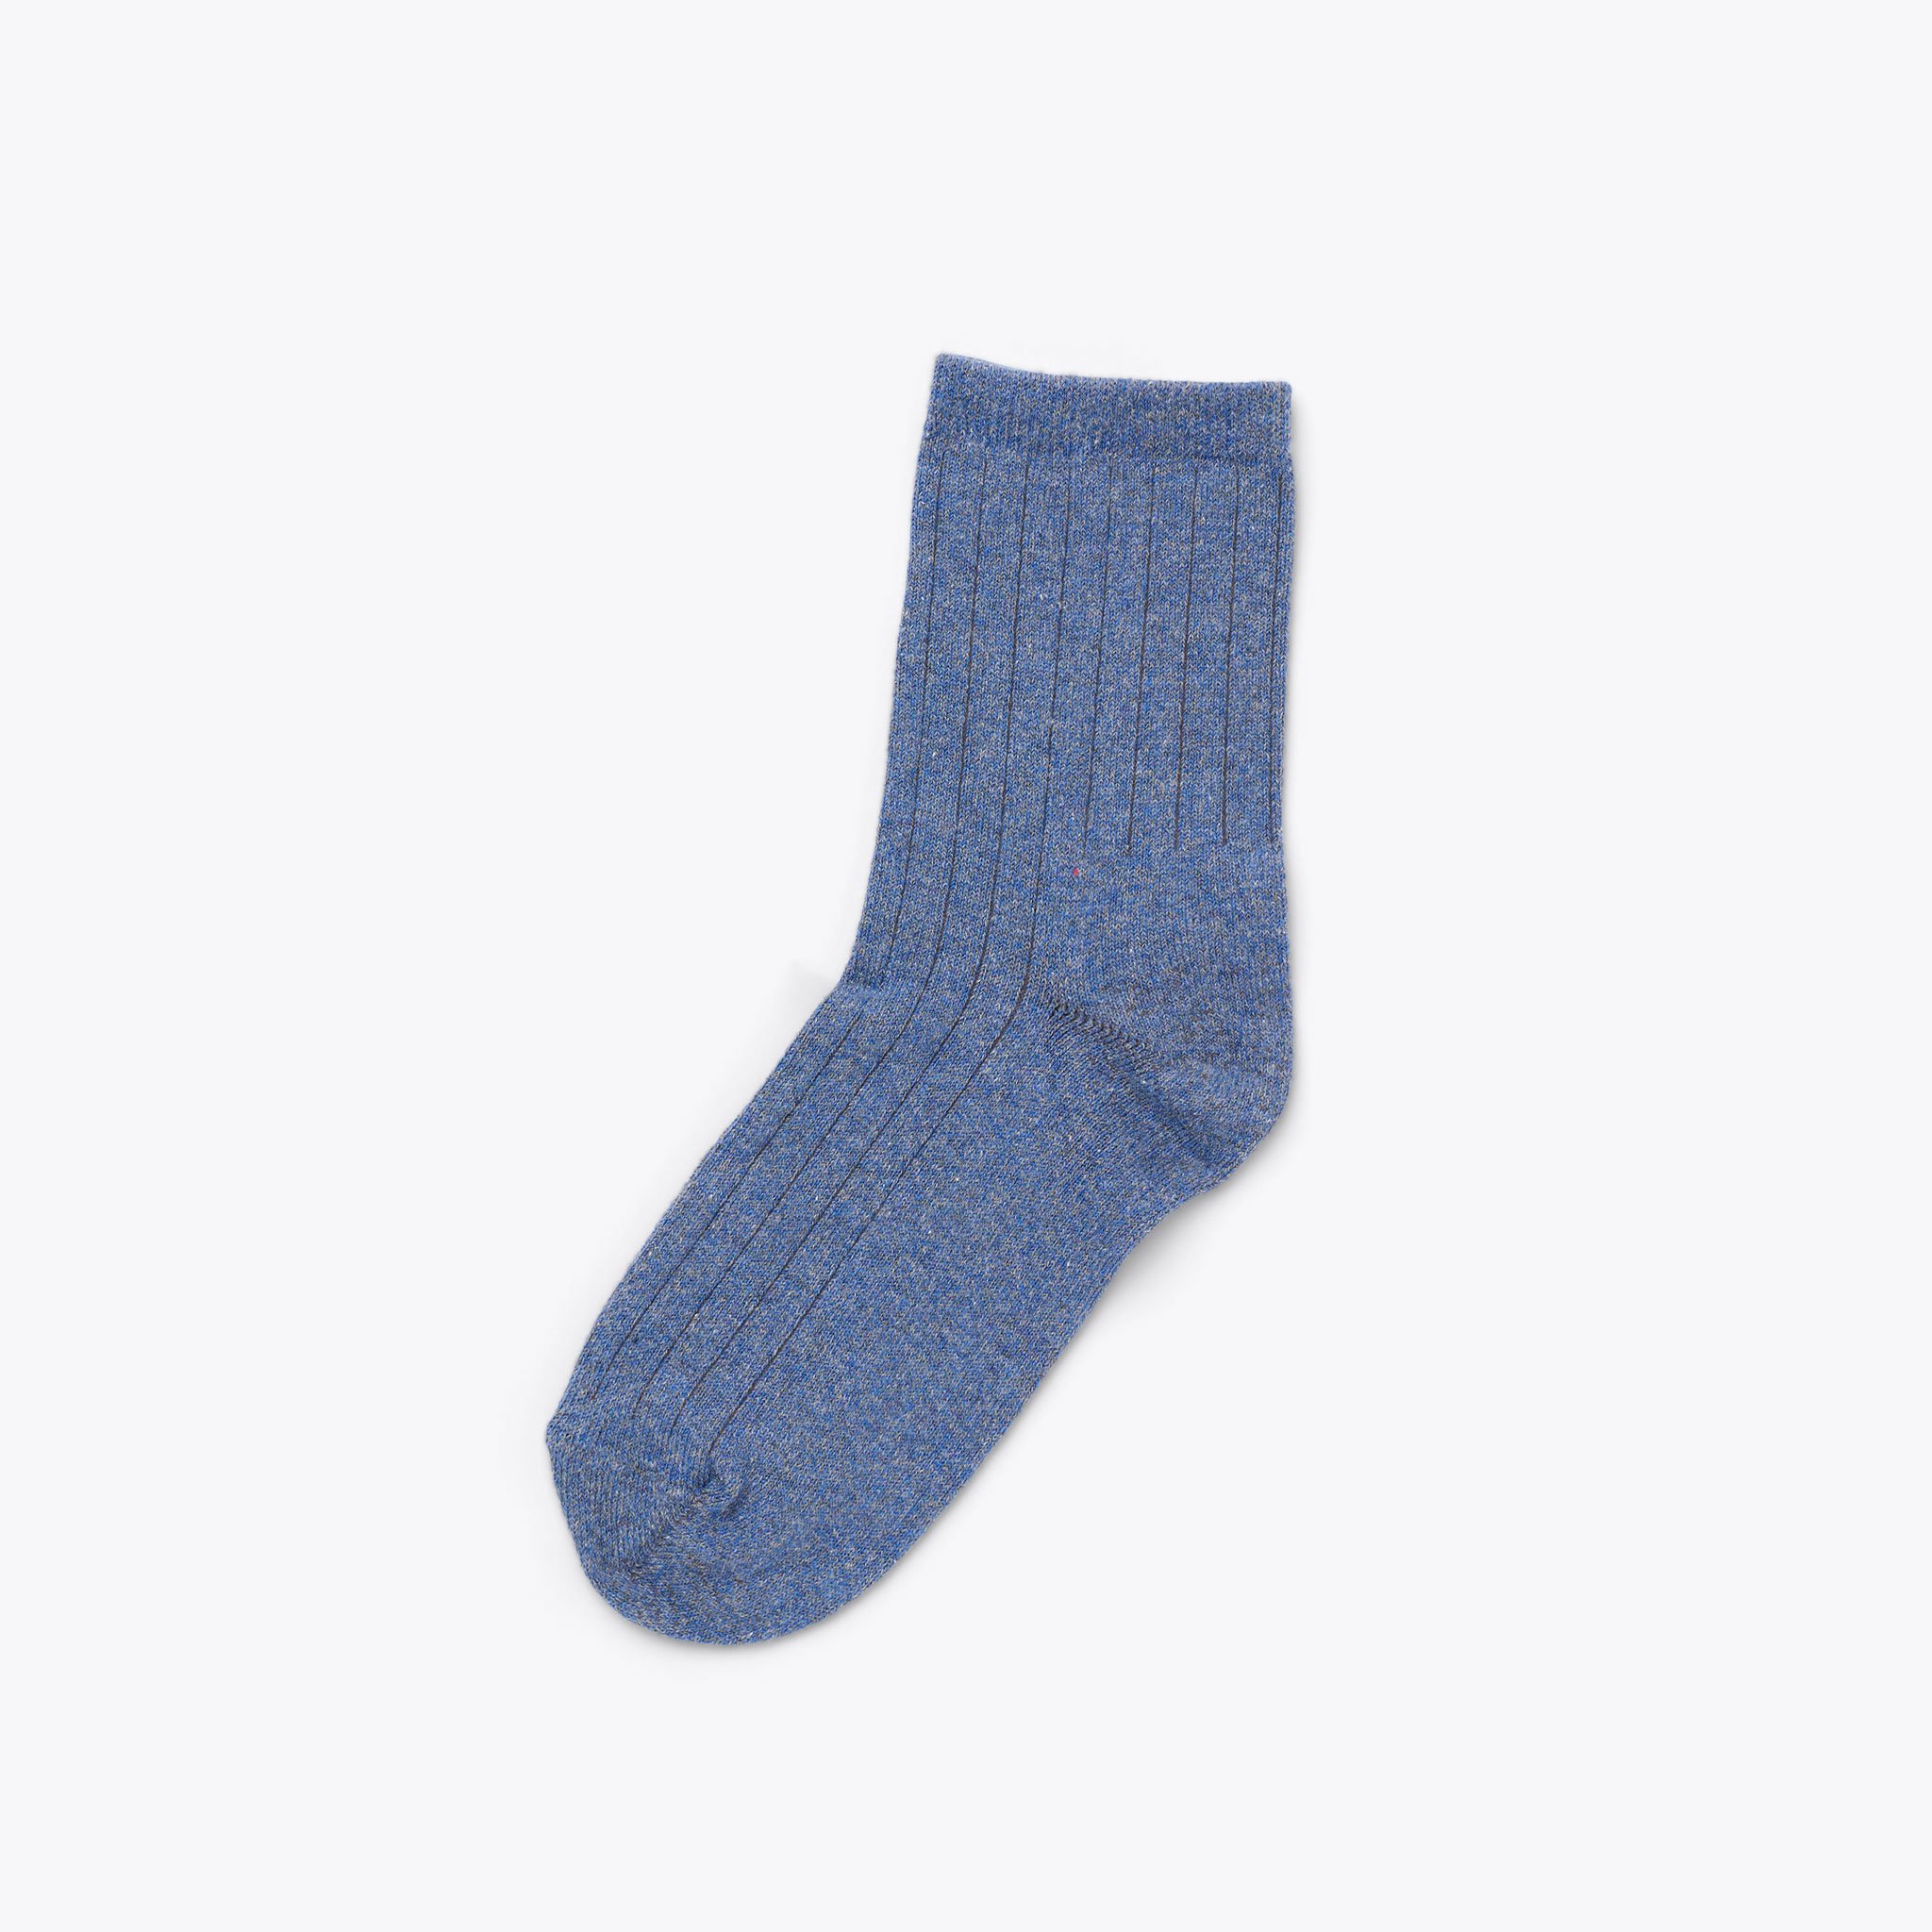 Nisolo Cotton Mid Sock Indigo Marl - Every Nisolo product is built on the foundation of comfort, function, and design. 